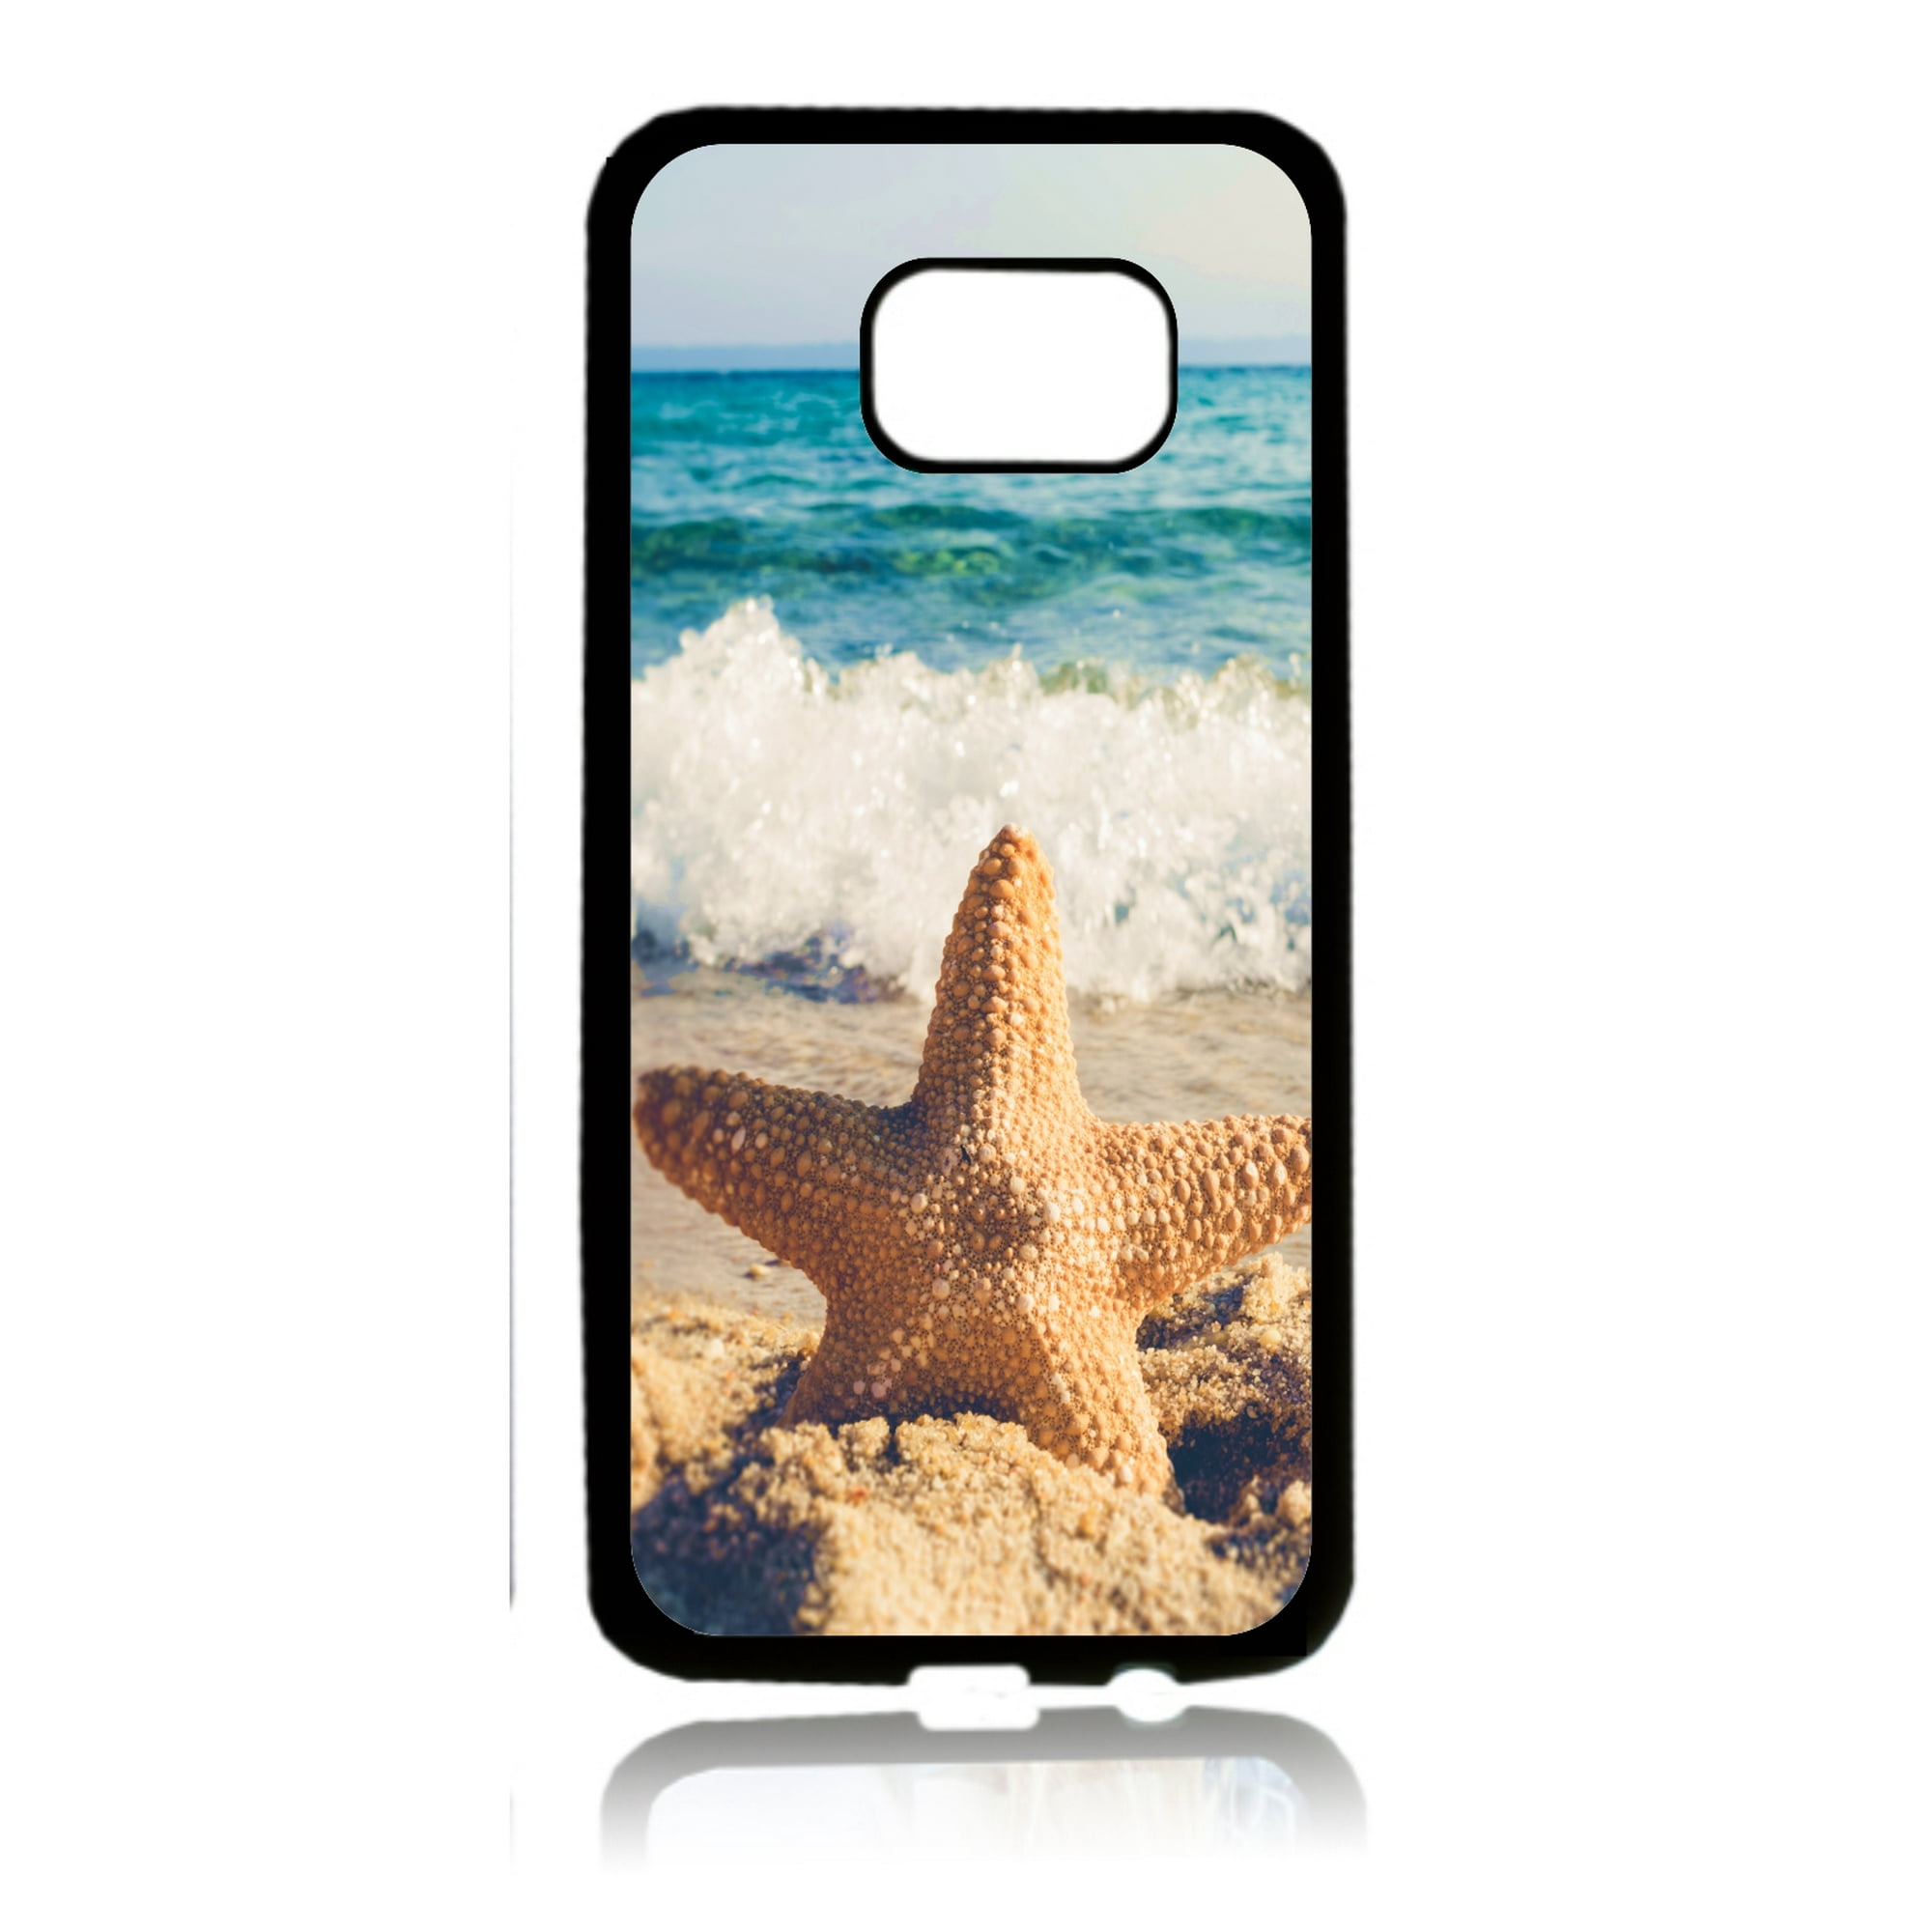 Starfish on the Ocean Beach Black Rubber Thin Case Cover for the Samsung Galaxy s8 Plus / s8+/ s8p - Samsung Galaxy s8 Plus Accessories - s8 + case - Walmart.com